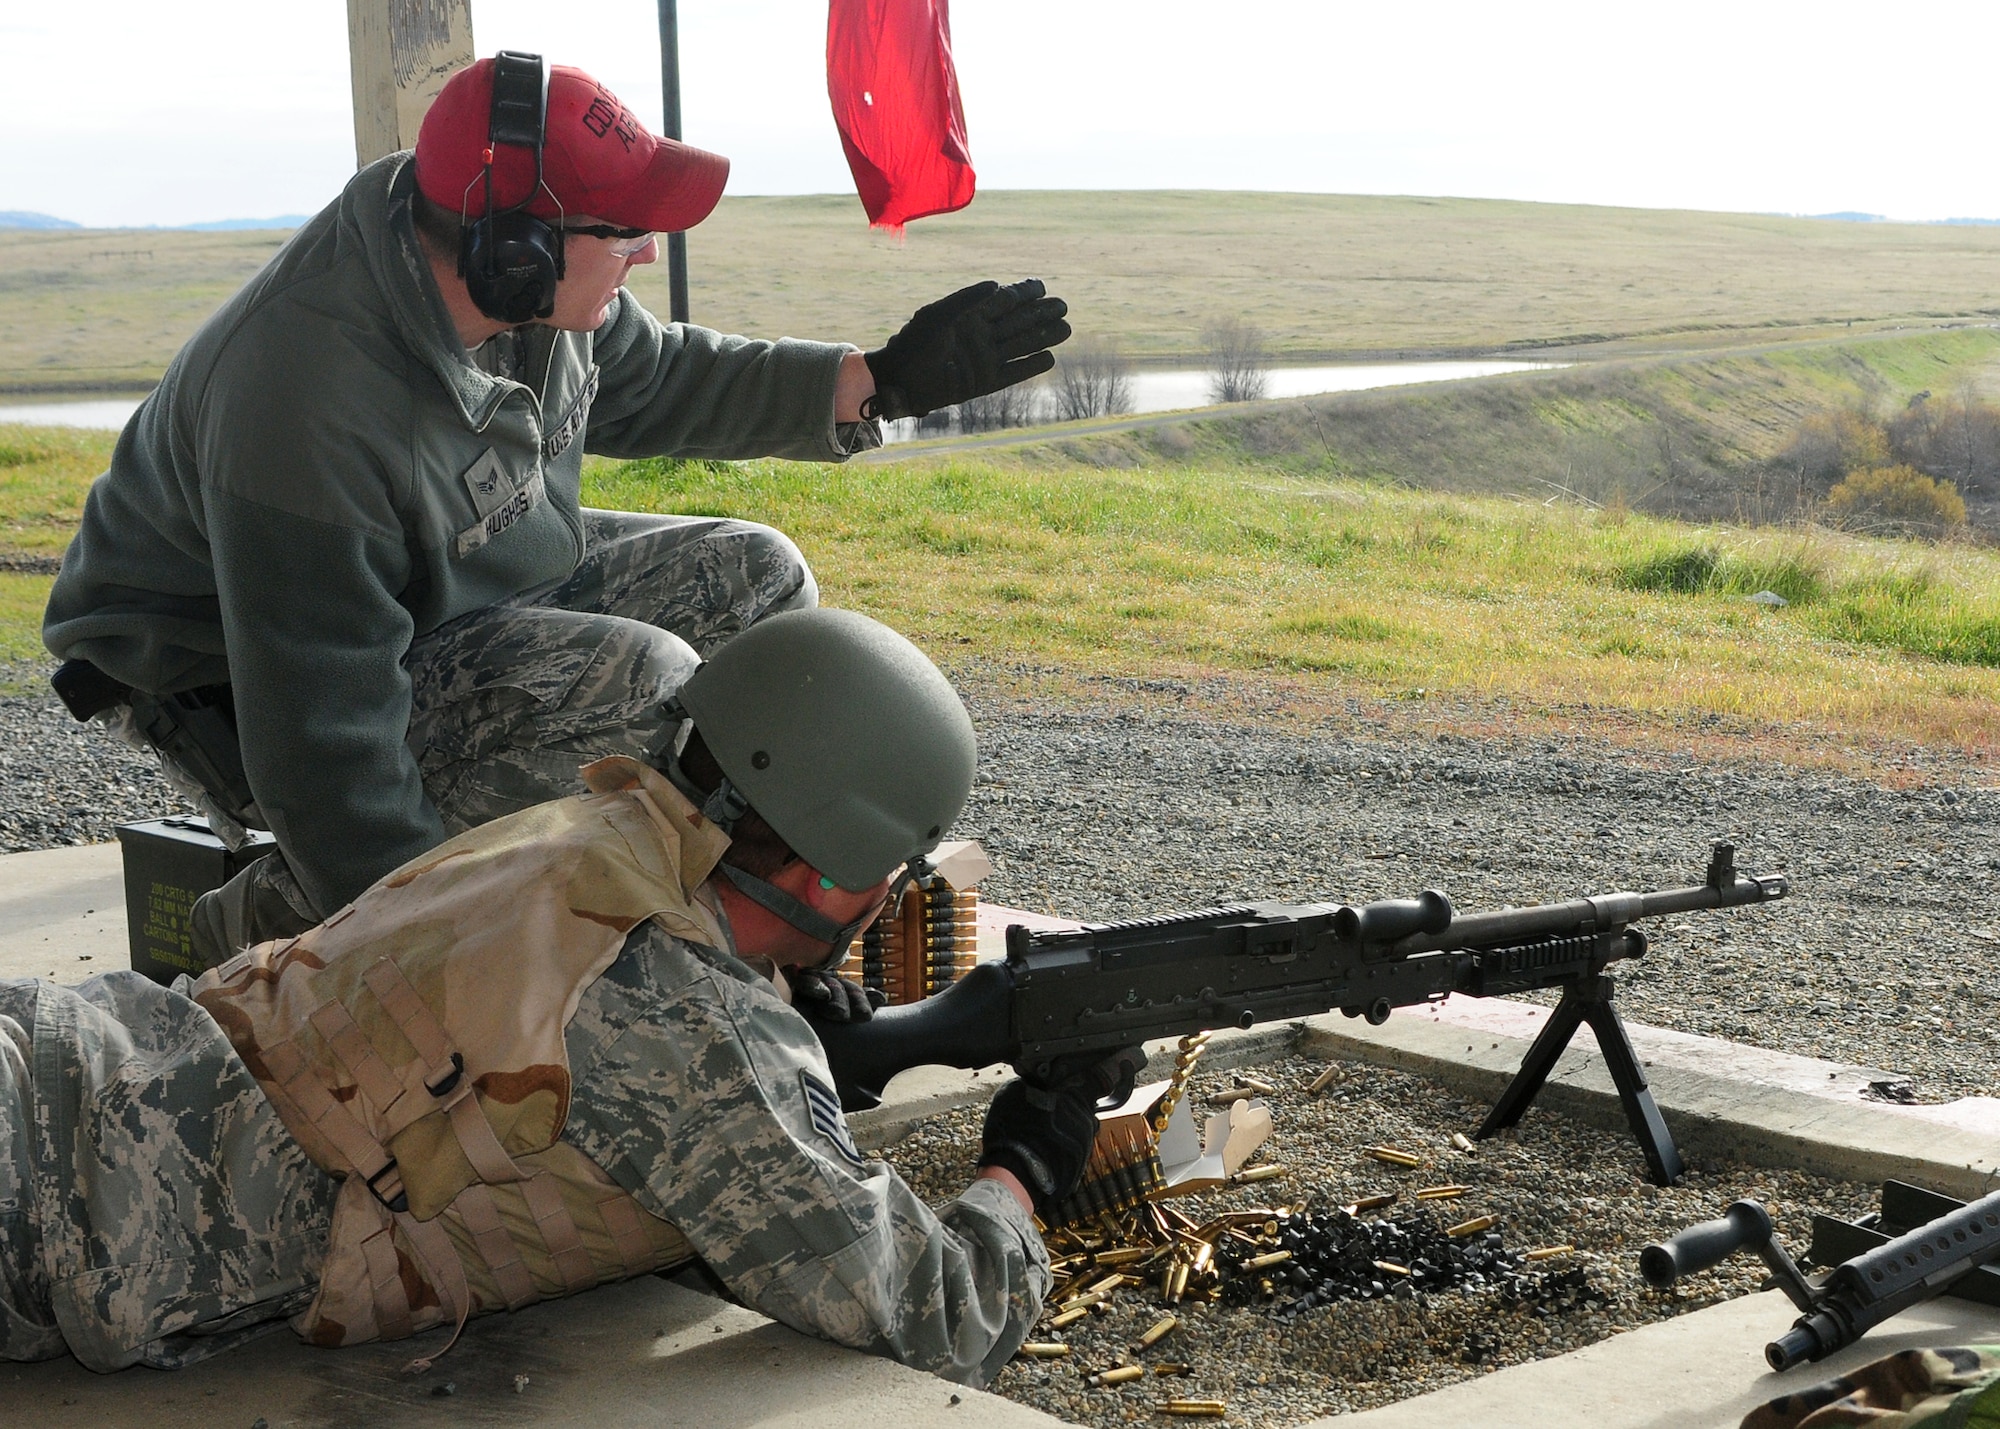 Senior Airman Michael Hughes (above), 9th Security Forces Squadron combat arms instructor, instructs Staff Sgt. Jay Weber, 9th Munitions Squadron munitions inspector, where to aim during heavy weapons training at Beale Air Force Base, Calif., Jan. 11, 2013. Weber was firing the M-240B light machine gun. (U.S. Air Force photo by Senior Airman Allen Pollard/Released)